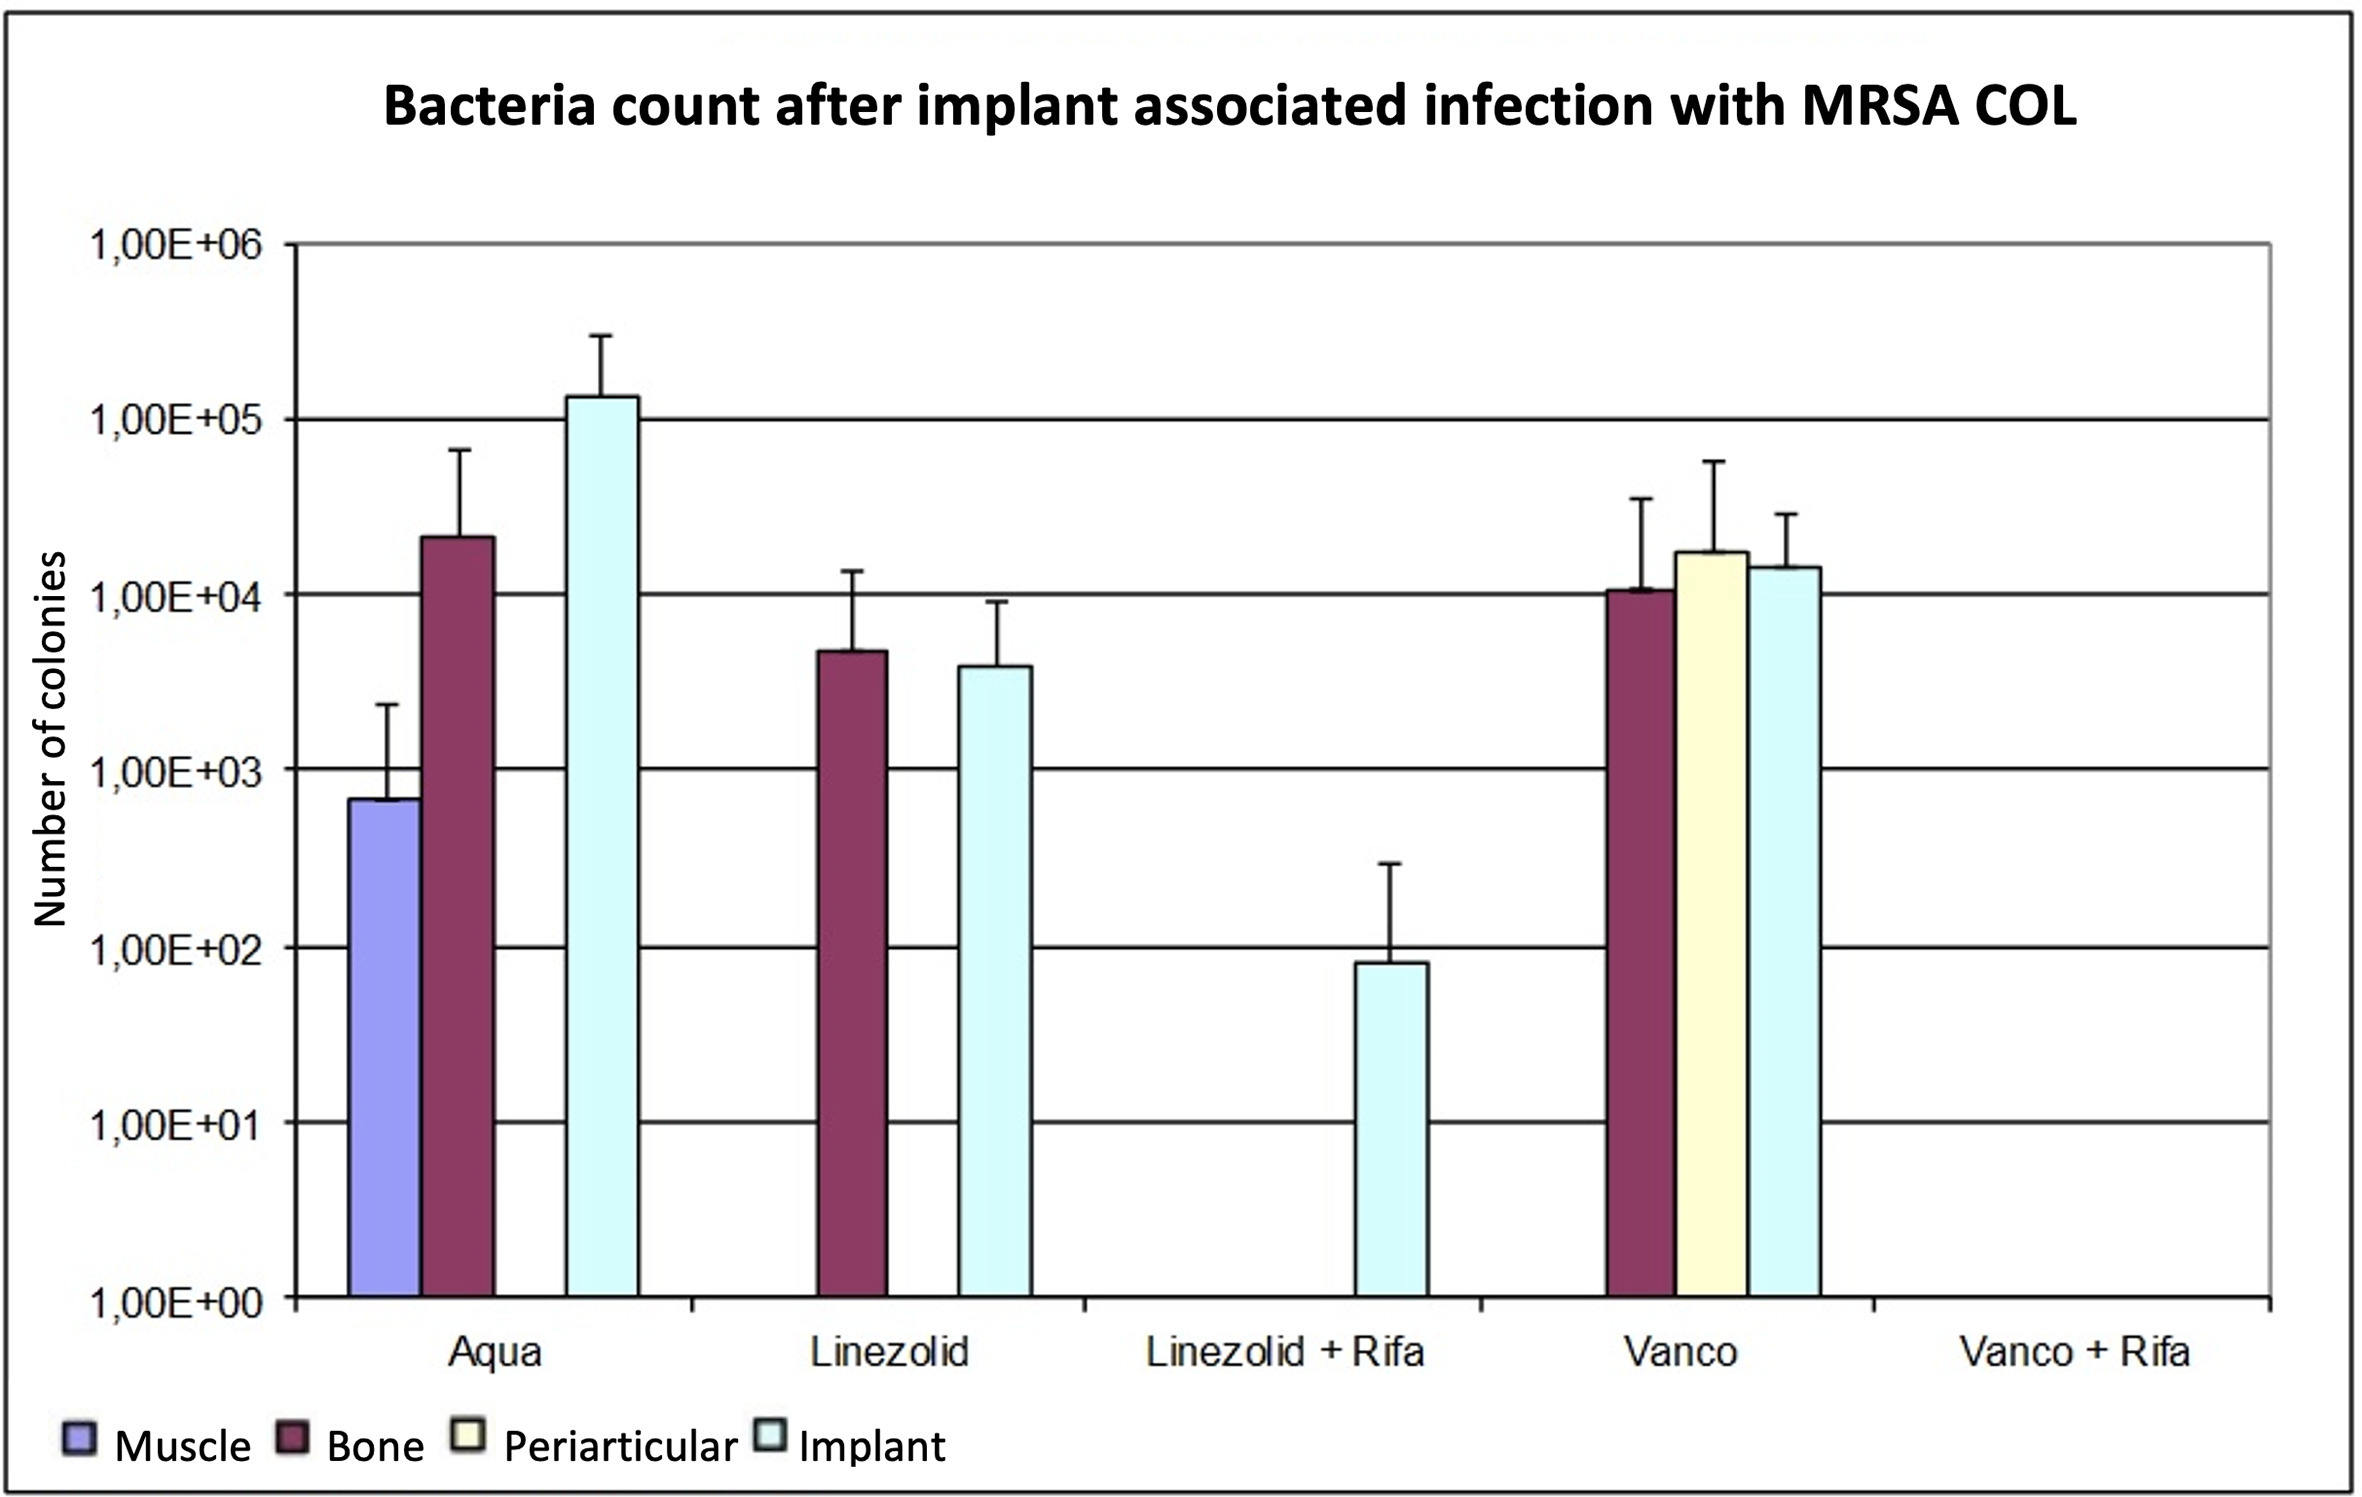 Fig. 3 
          Determination of the bacterial count in tissue with methicillin-resistant Staphylococcus aureus (MRSA) (COL), expressed as mean value and standard deviation. The bacterial count is expressed in the tissue as colony-forming units (CFUs)/g and in the implant in CFU/Implantat. The detection limit is 80 CFUs.
        